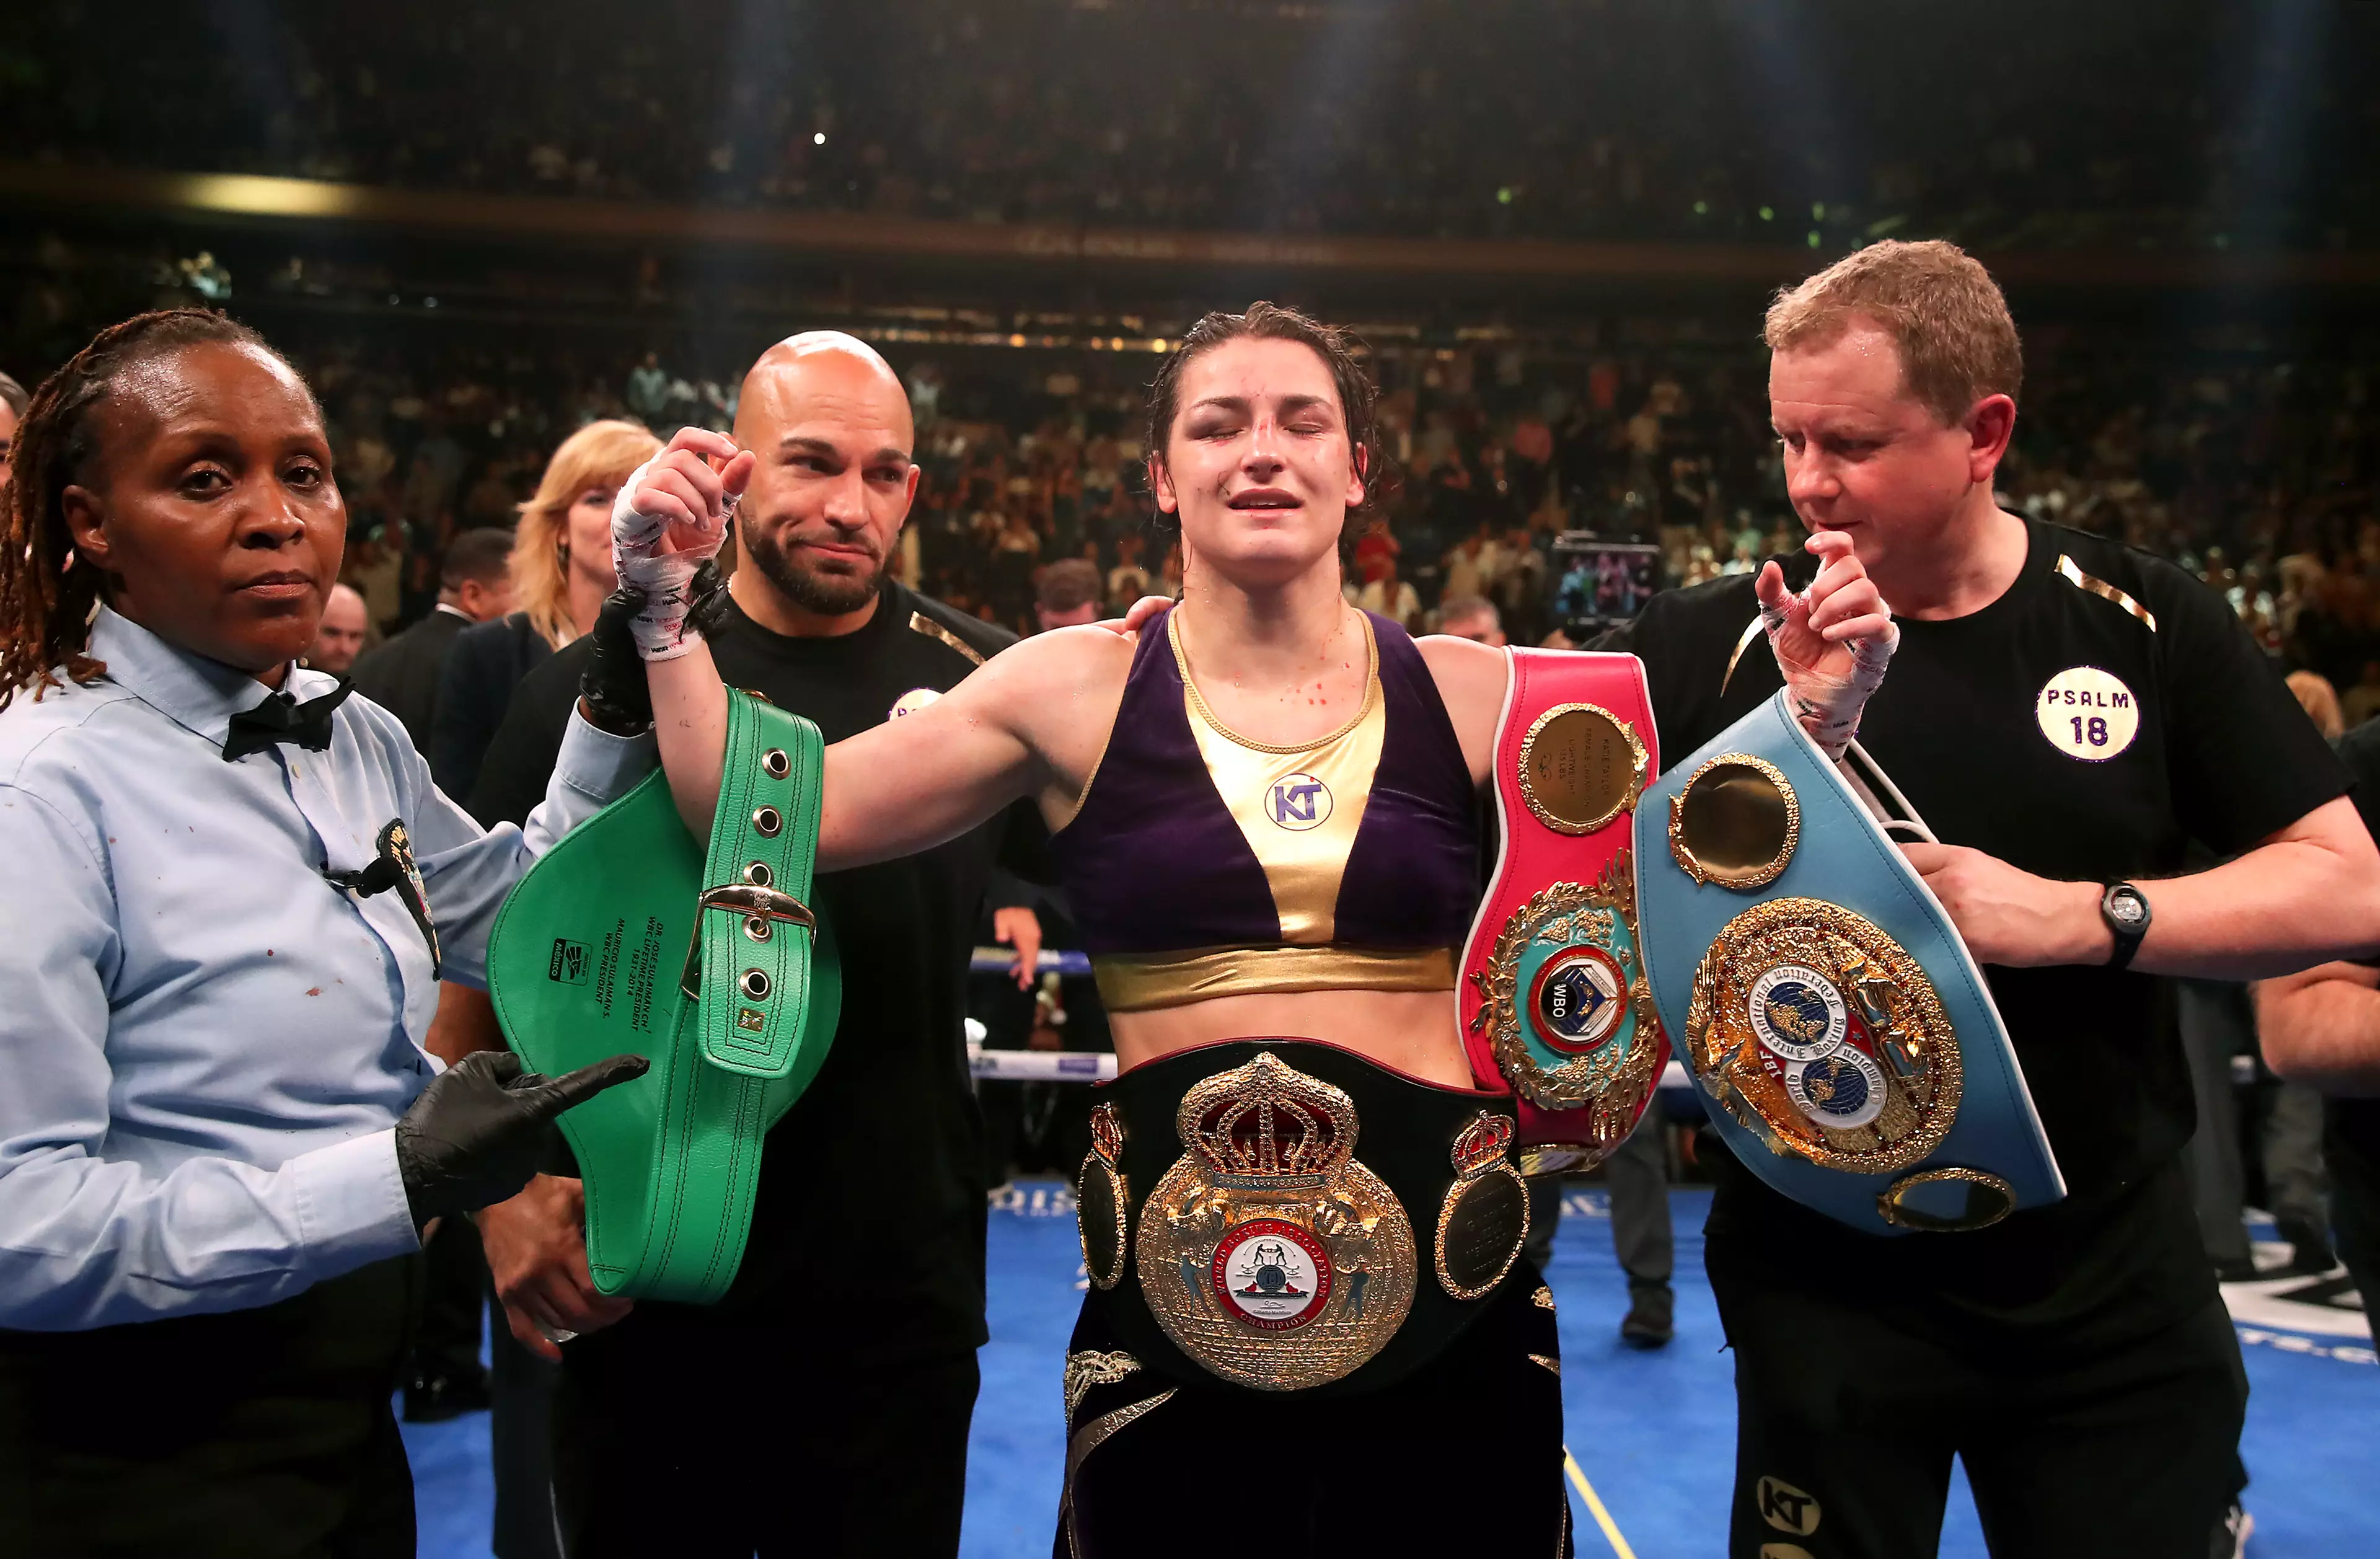 Eddie Hearn would like to make a fight between Katie Taylor and an MMA star like Holly Holm